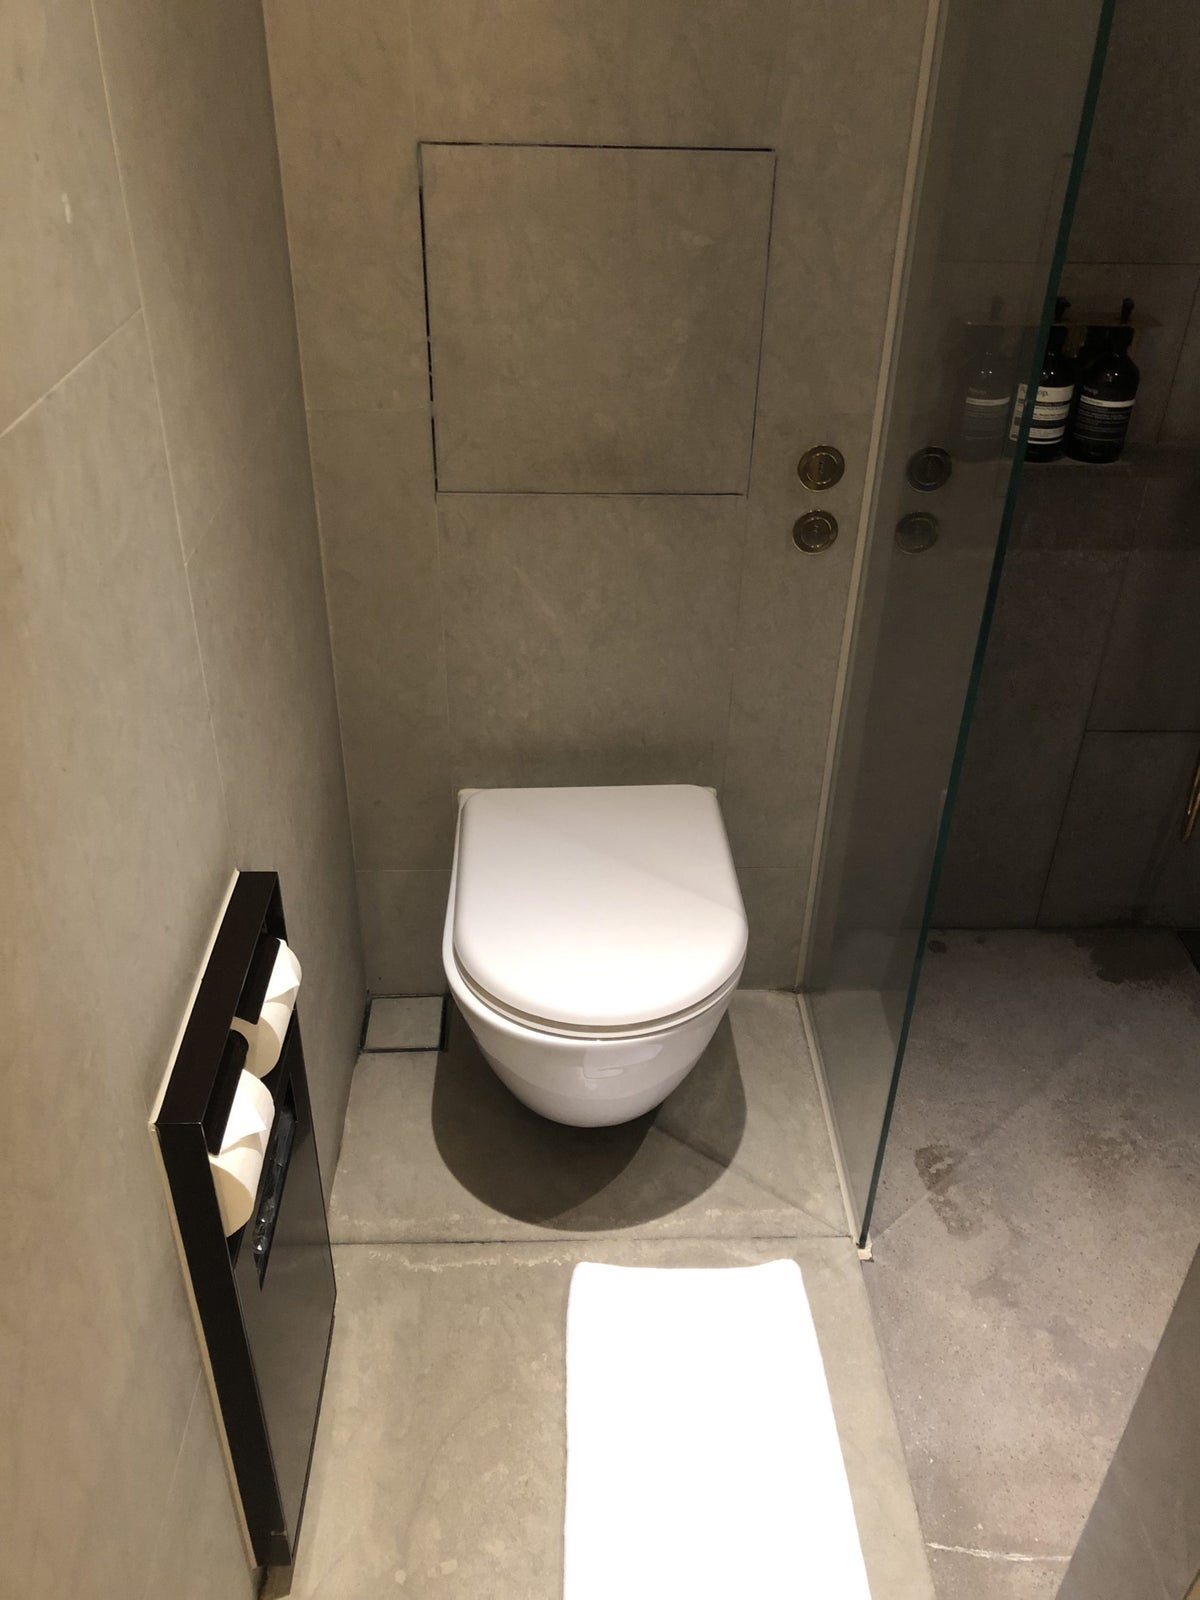 The Pier, Business at Hong Kong International Airport shower suite toilet